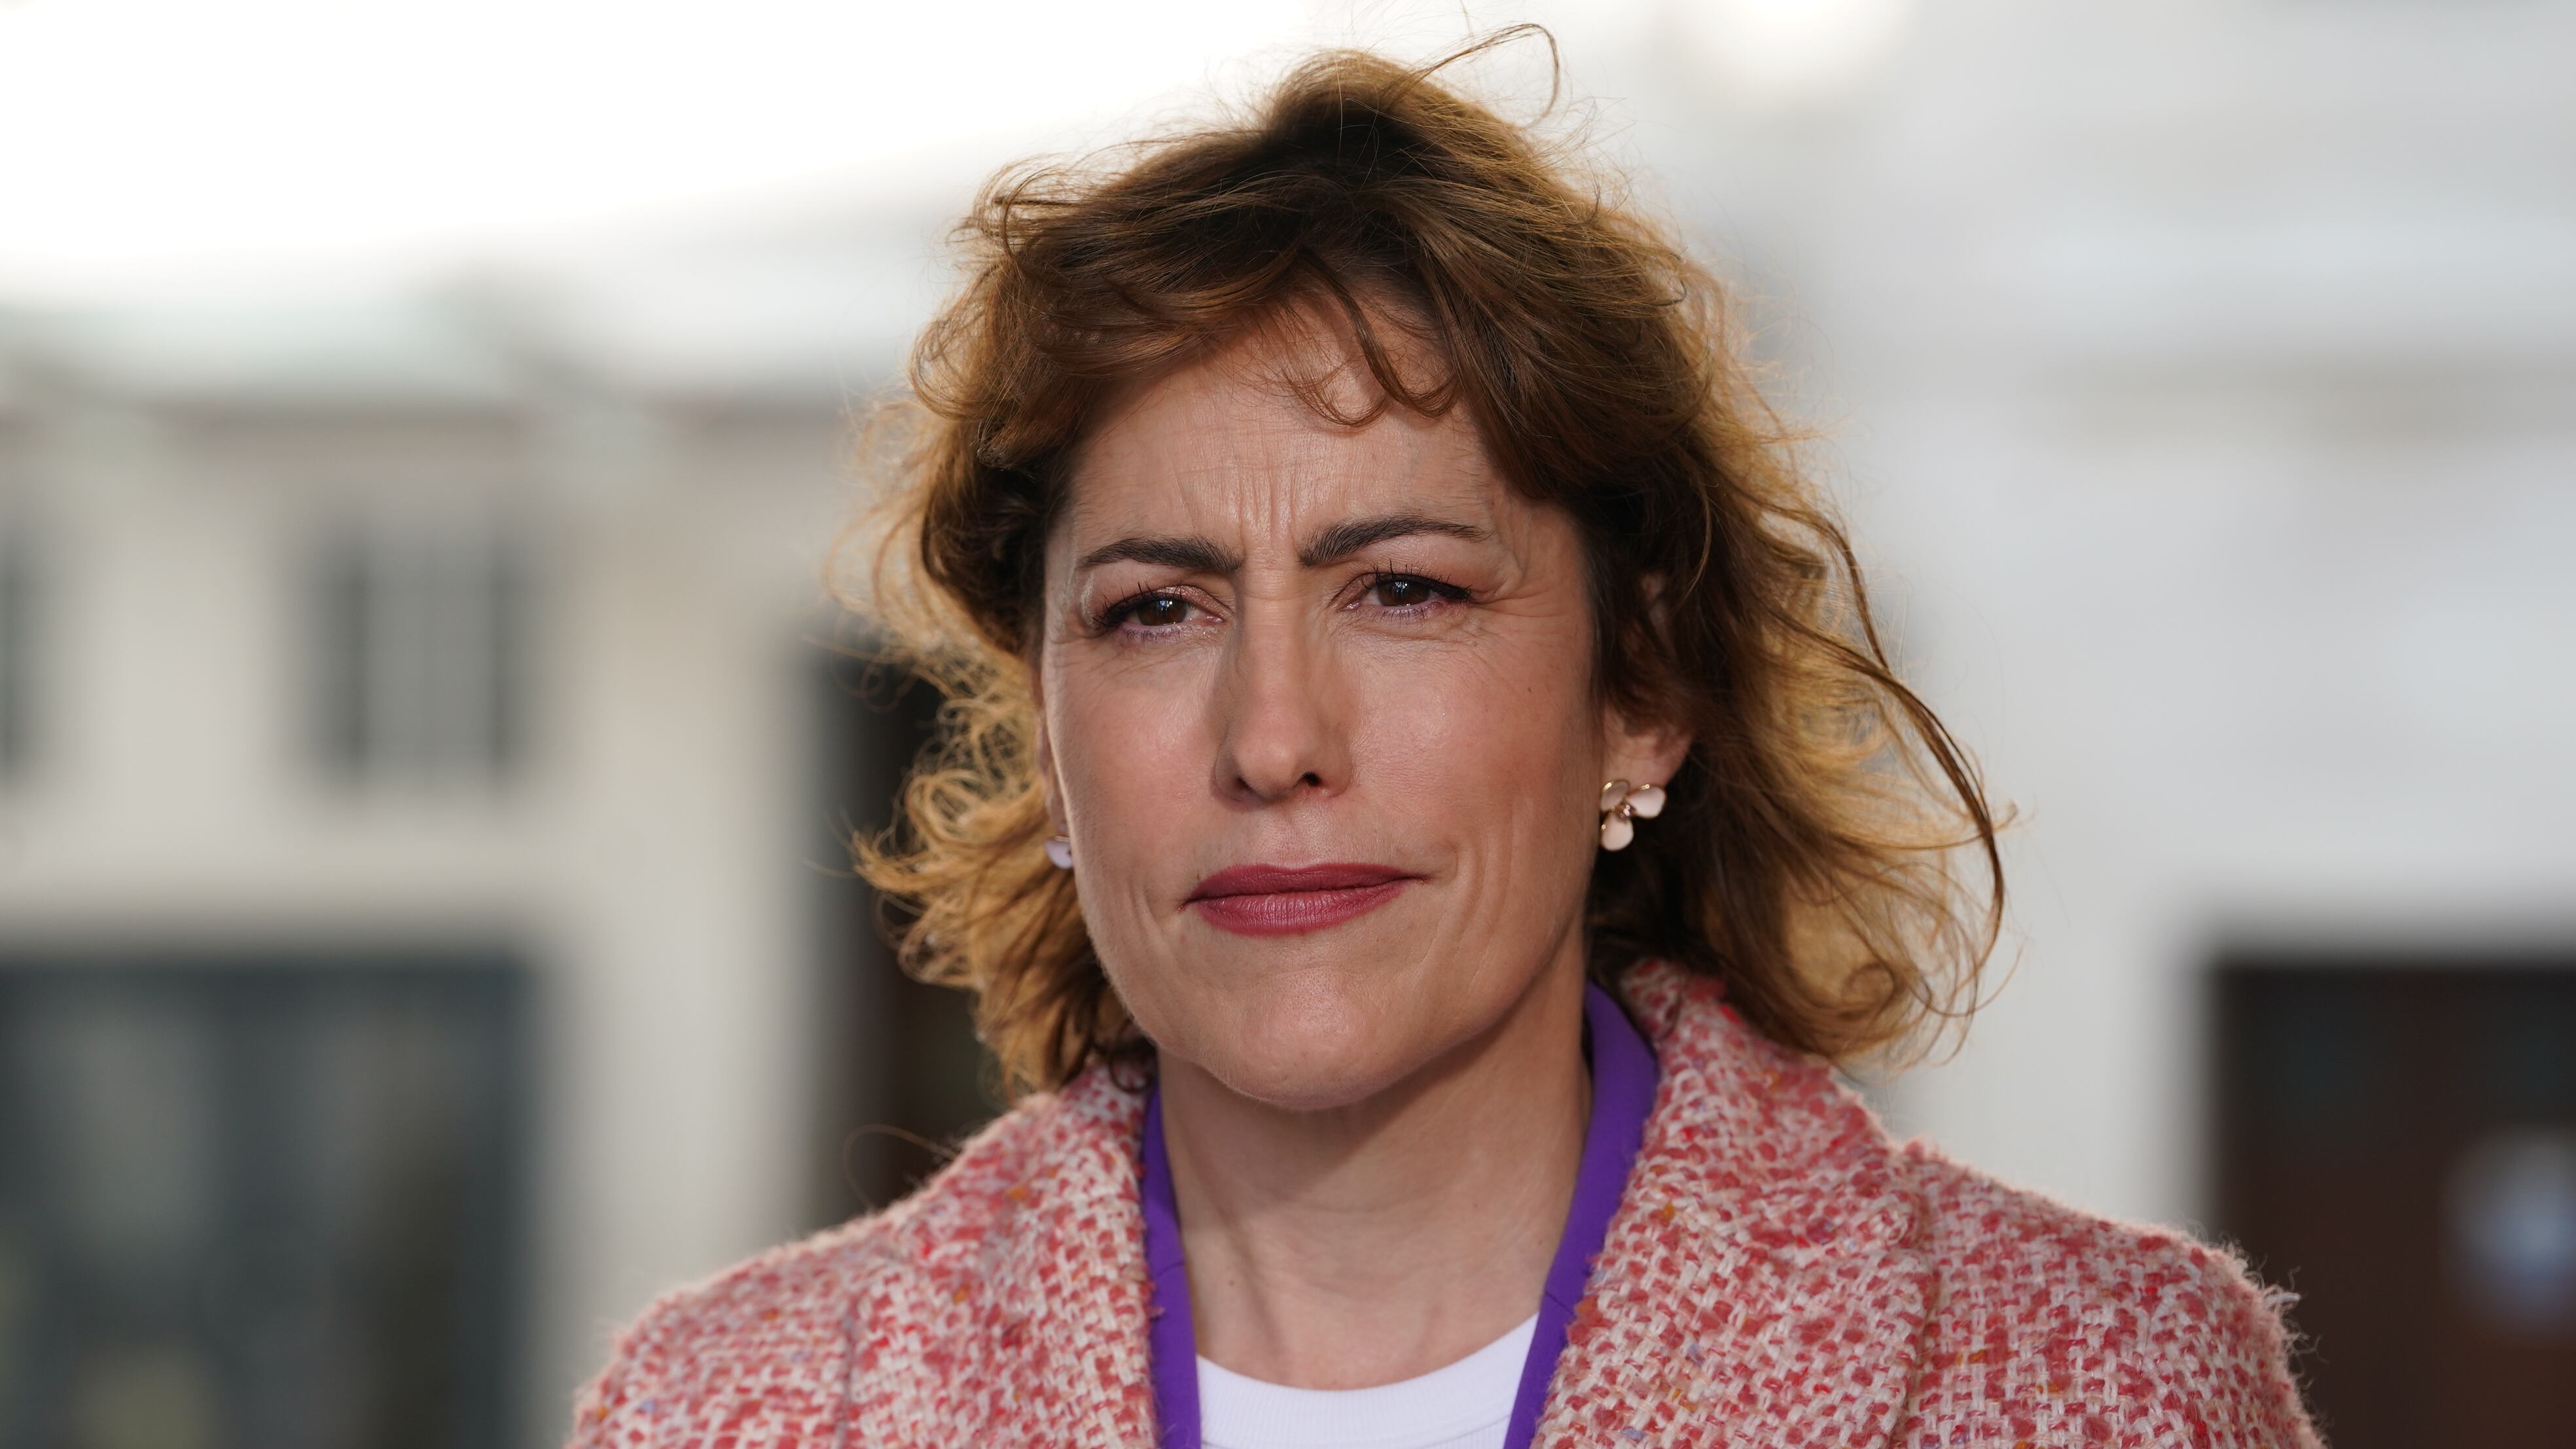 Health Secretary Victoria Atkins has spoken out against Labour’s planned ban on conversion therapy